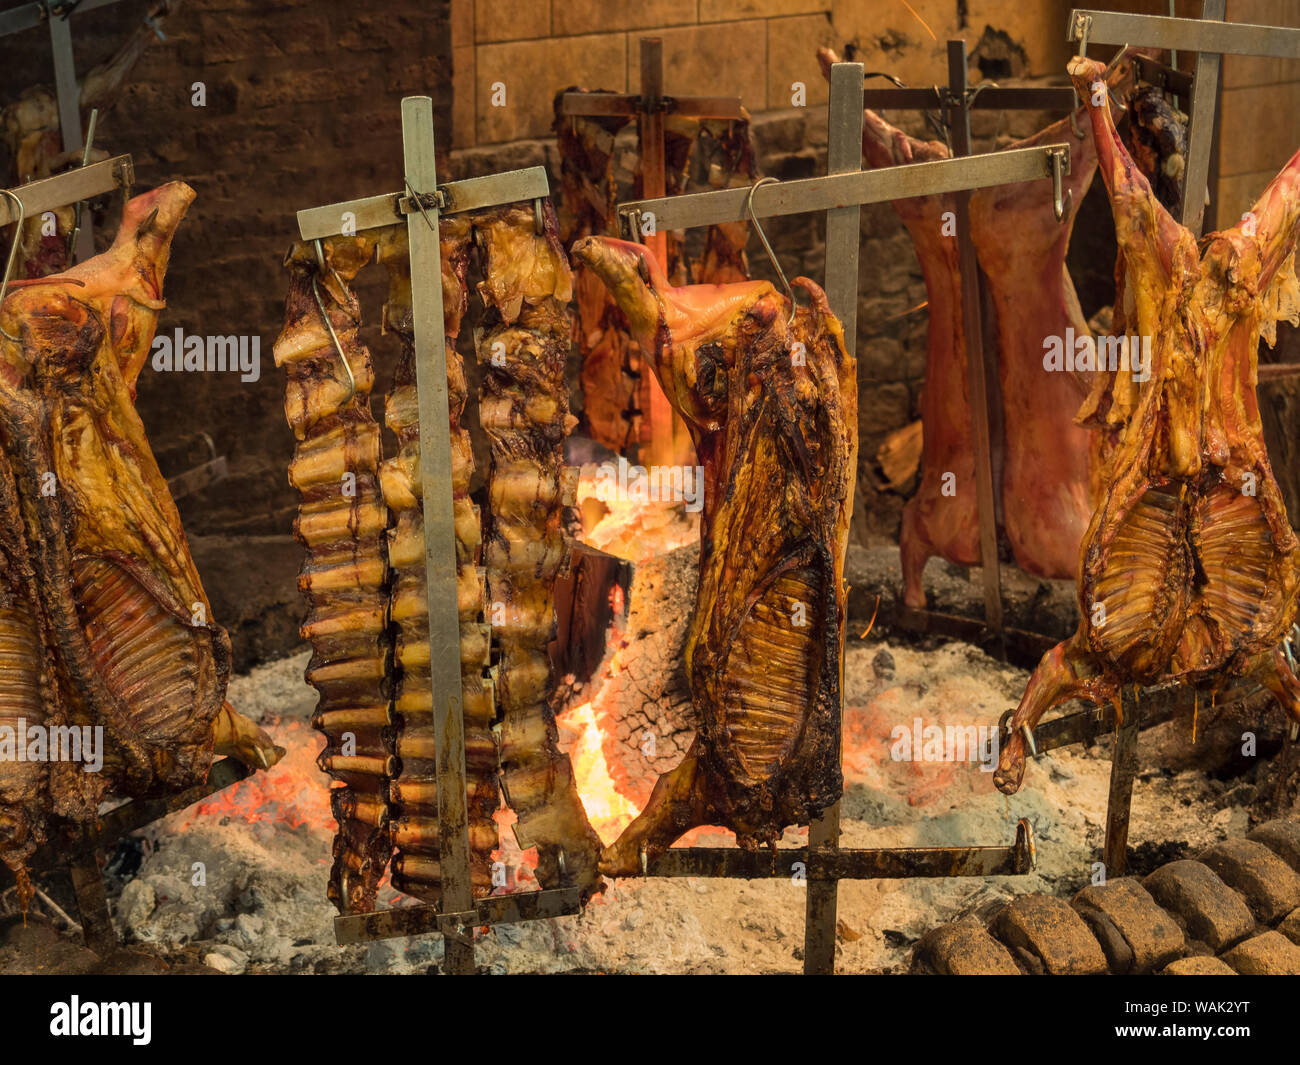 Typical meat restaurant Asador Criollo in Microcentro, Buenos Aires, Argentina. (Editorial Use Only) Stock Photo